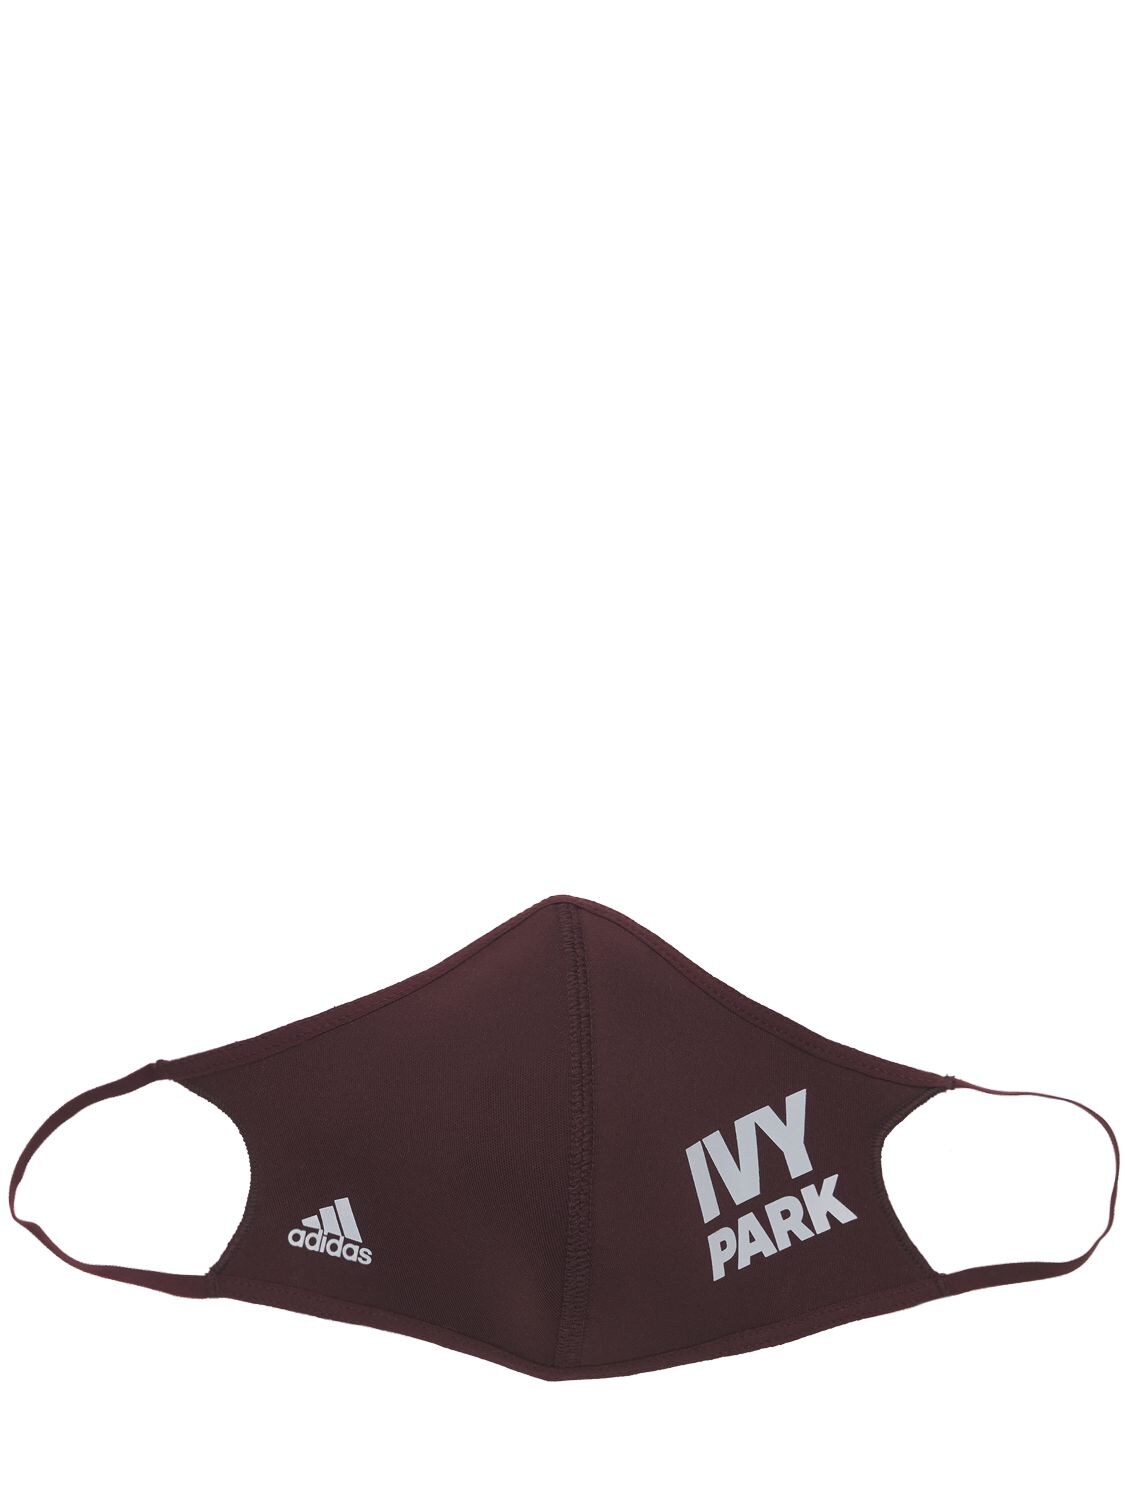 Shop Adidas X Ivy Park 3 Pack Of Reflective Masks In White